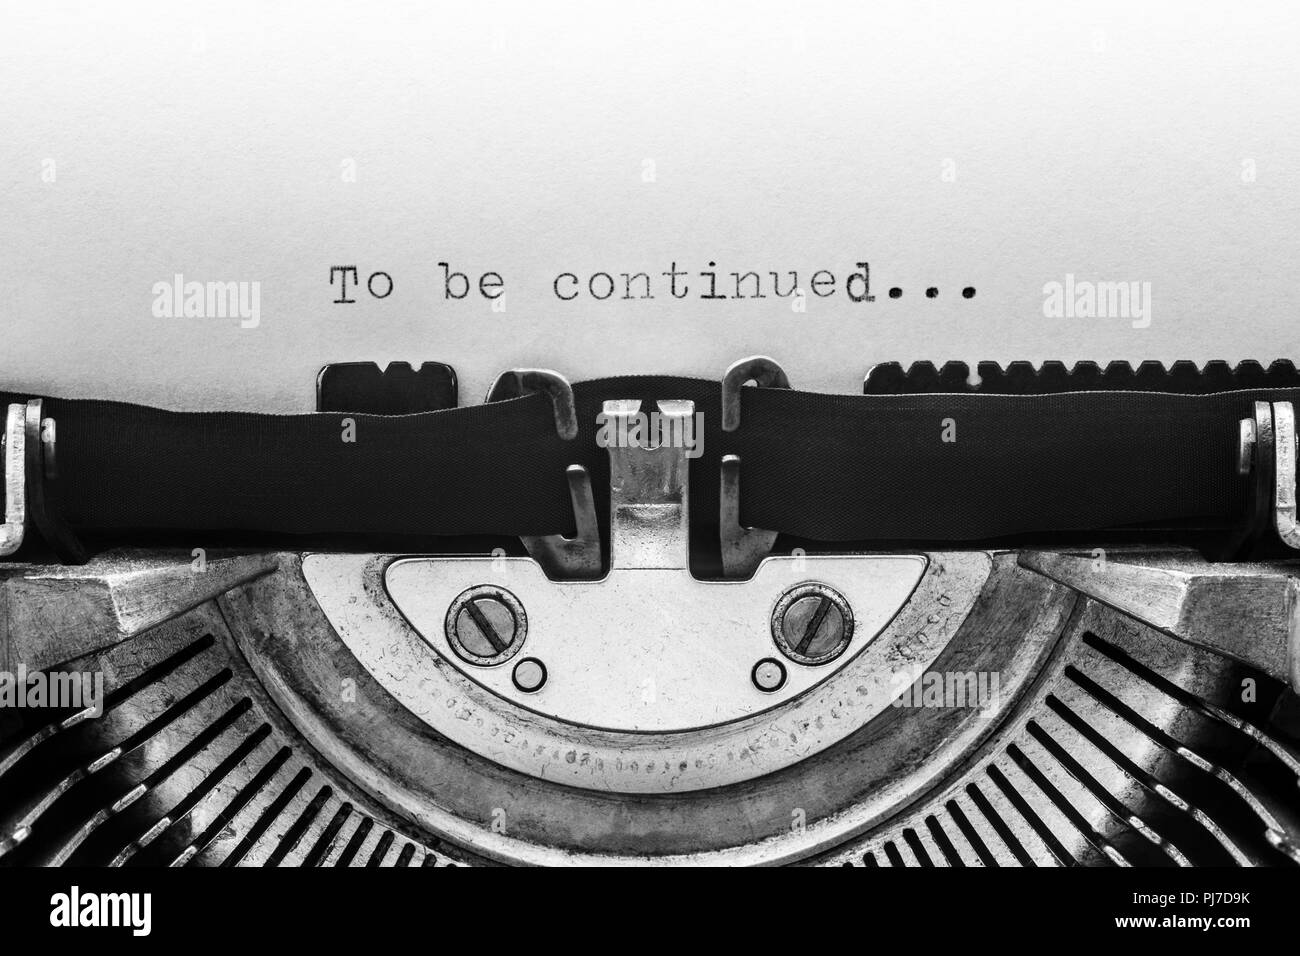 To be continued typed on a vintage typewriter Stock Photo